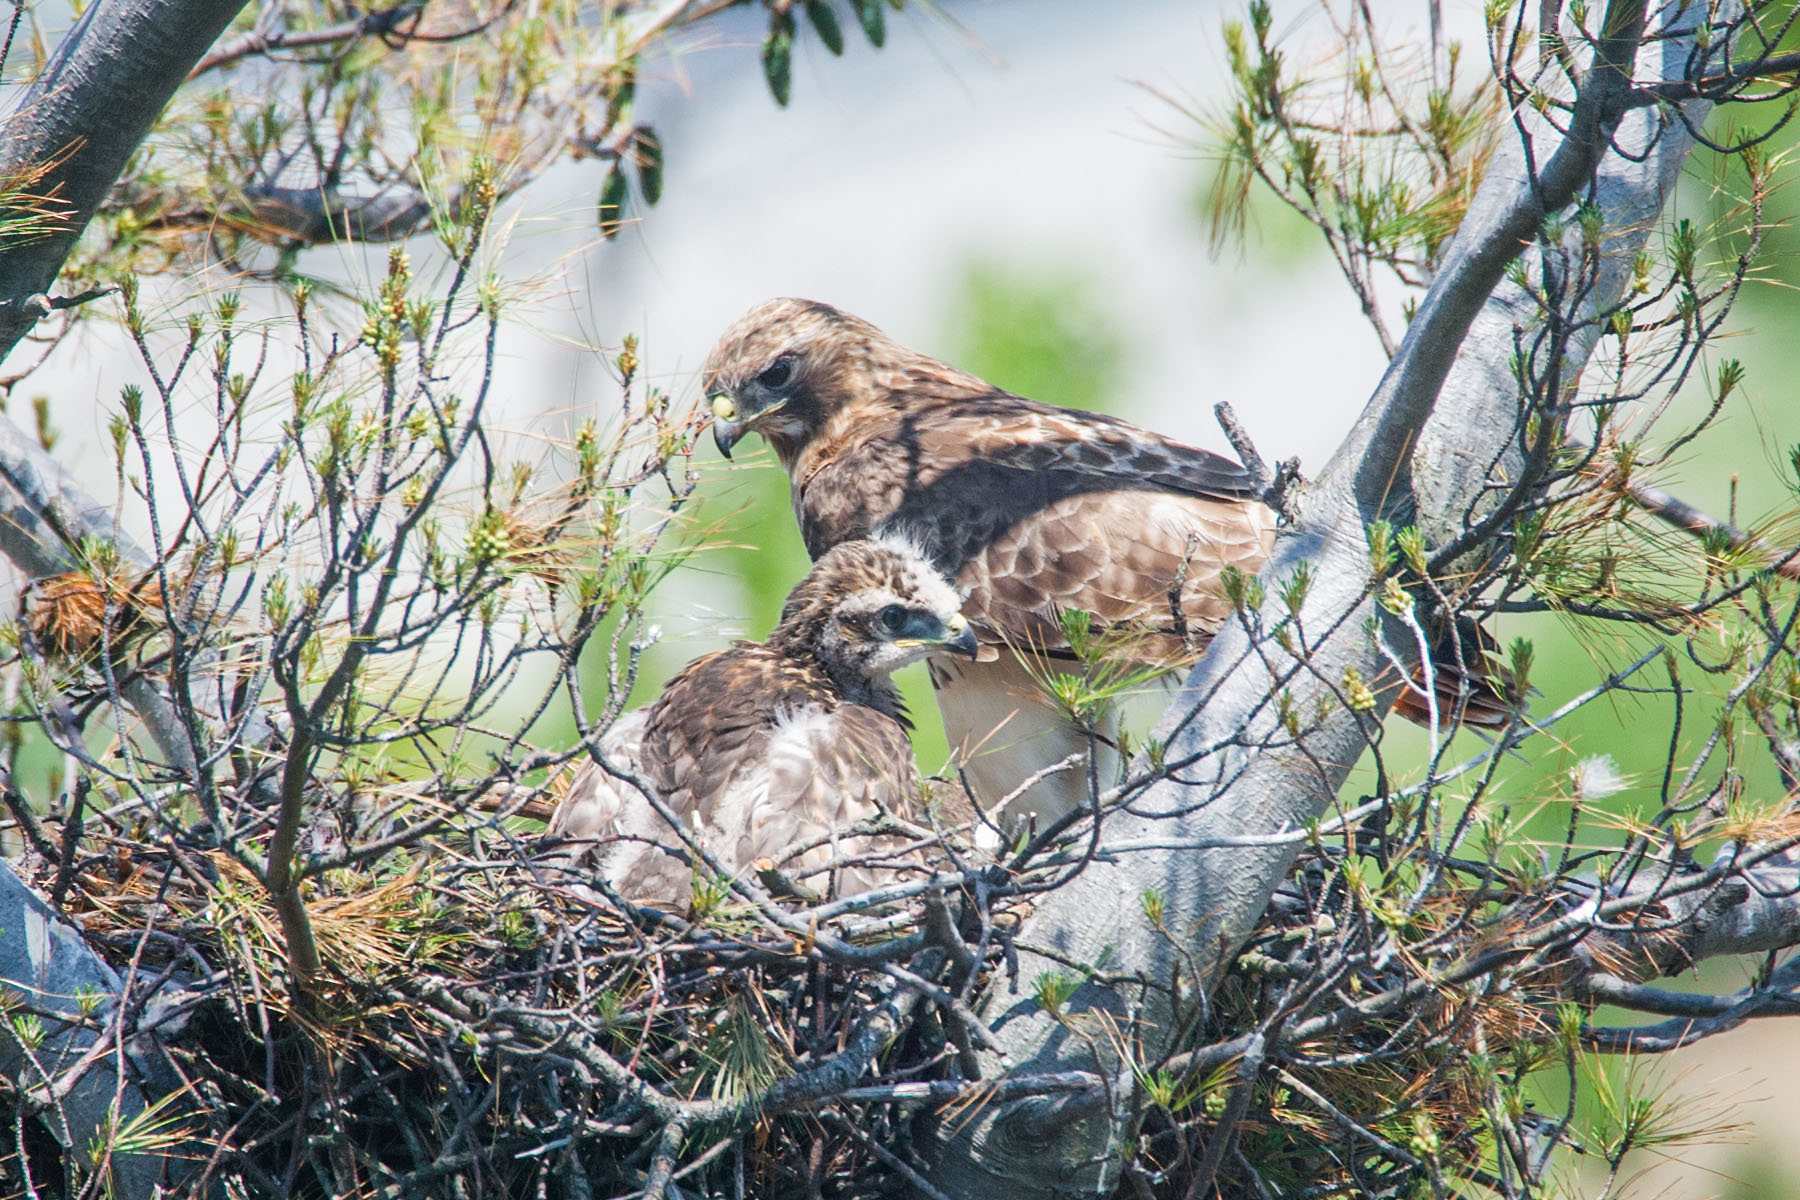 One week from fledging.  Click for next photo.